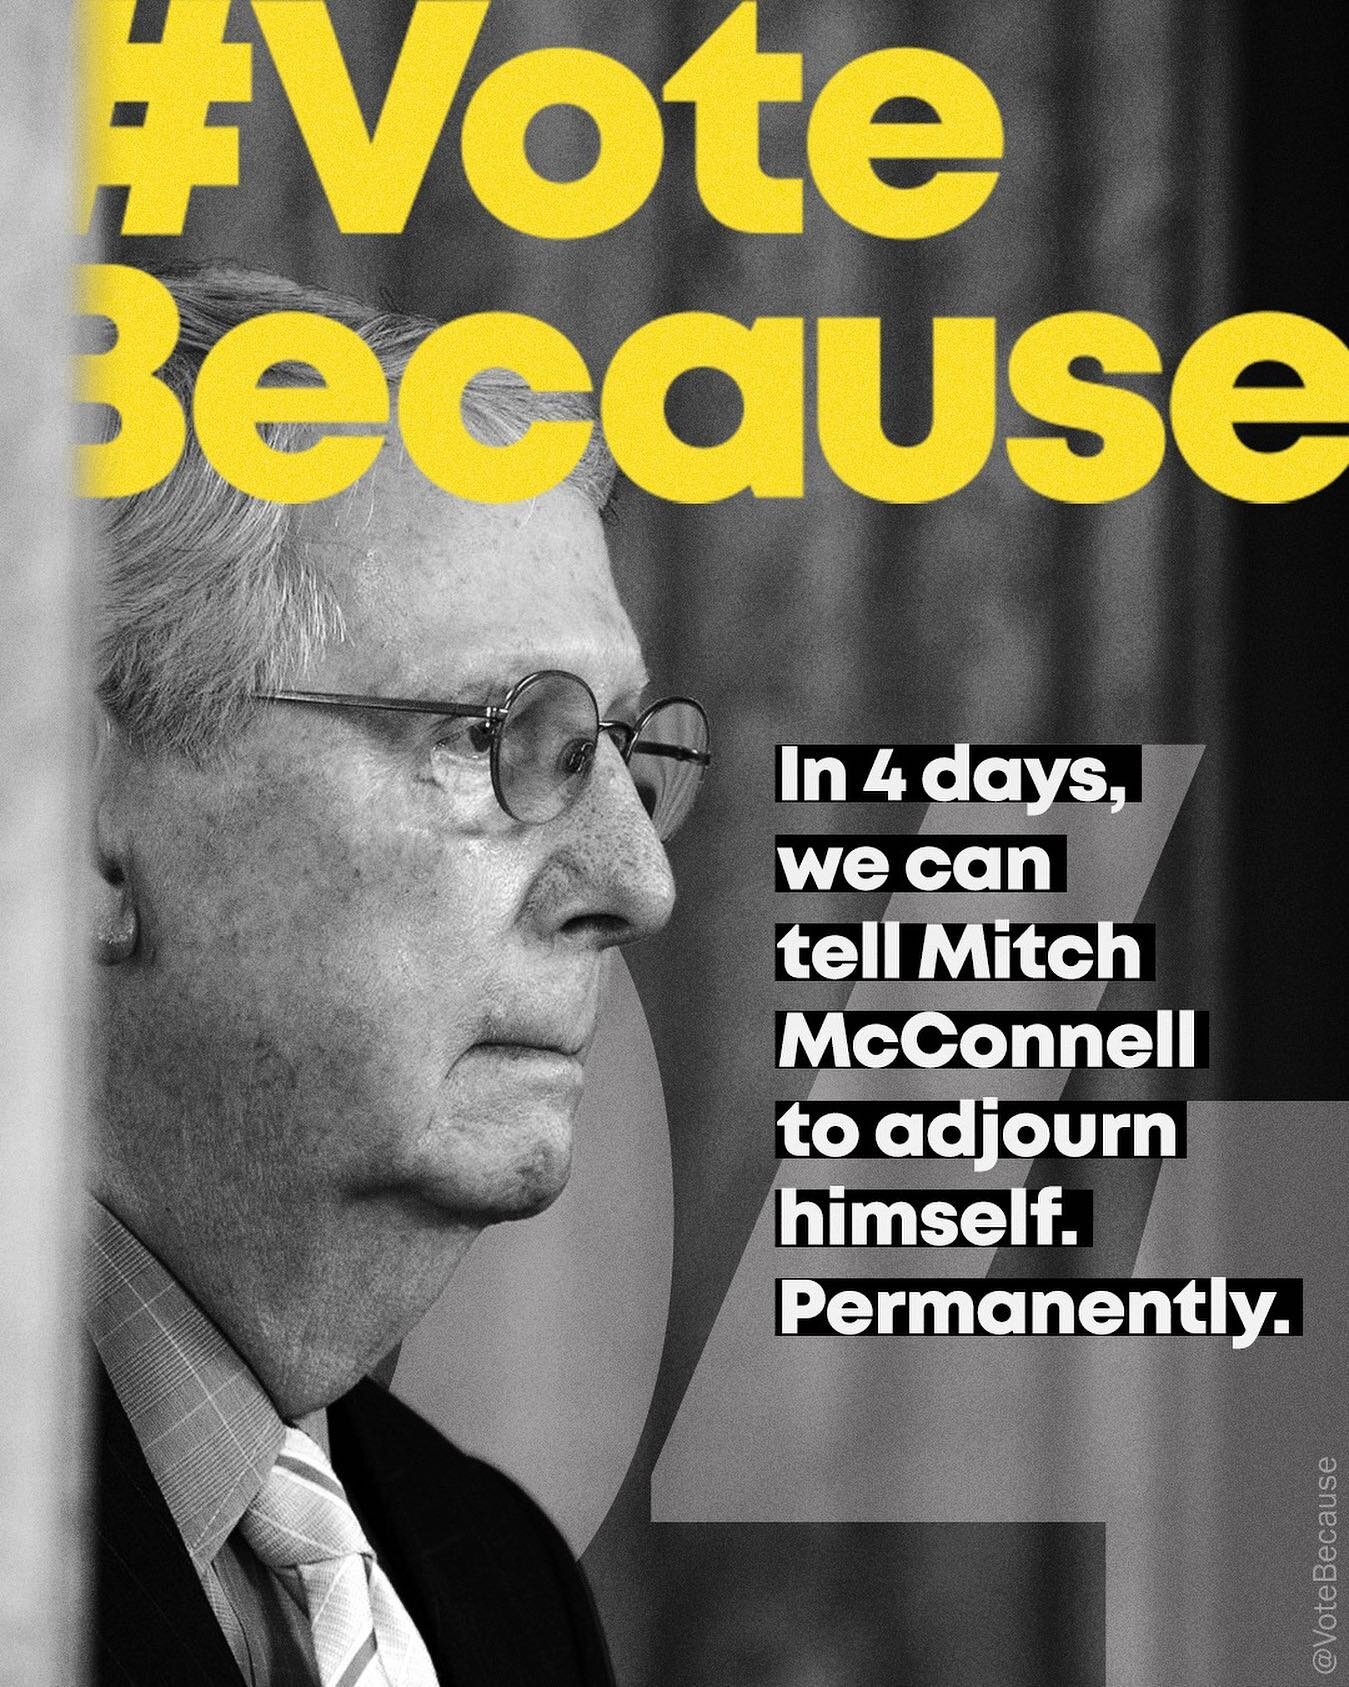 Mitch McConnell has adjourned the Senate without passing more stimulus for struggling Americans, AGAIN. It took him a record 30 days to unjustly confirm a new Supreme Court Justice when 60 million people had already voted. But when it comes to helpin